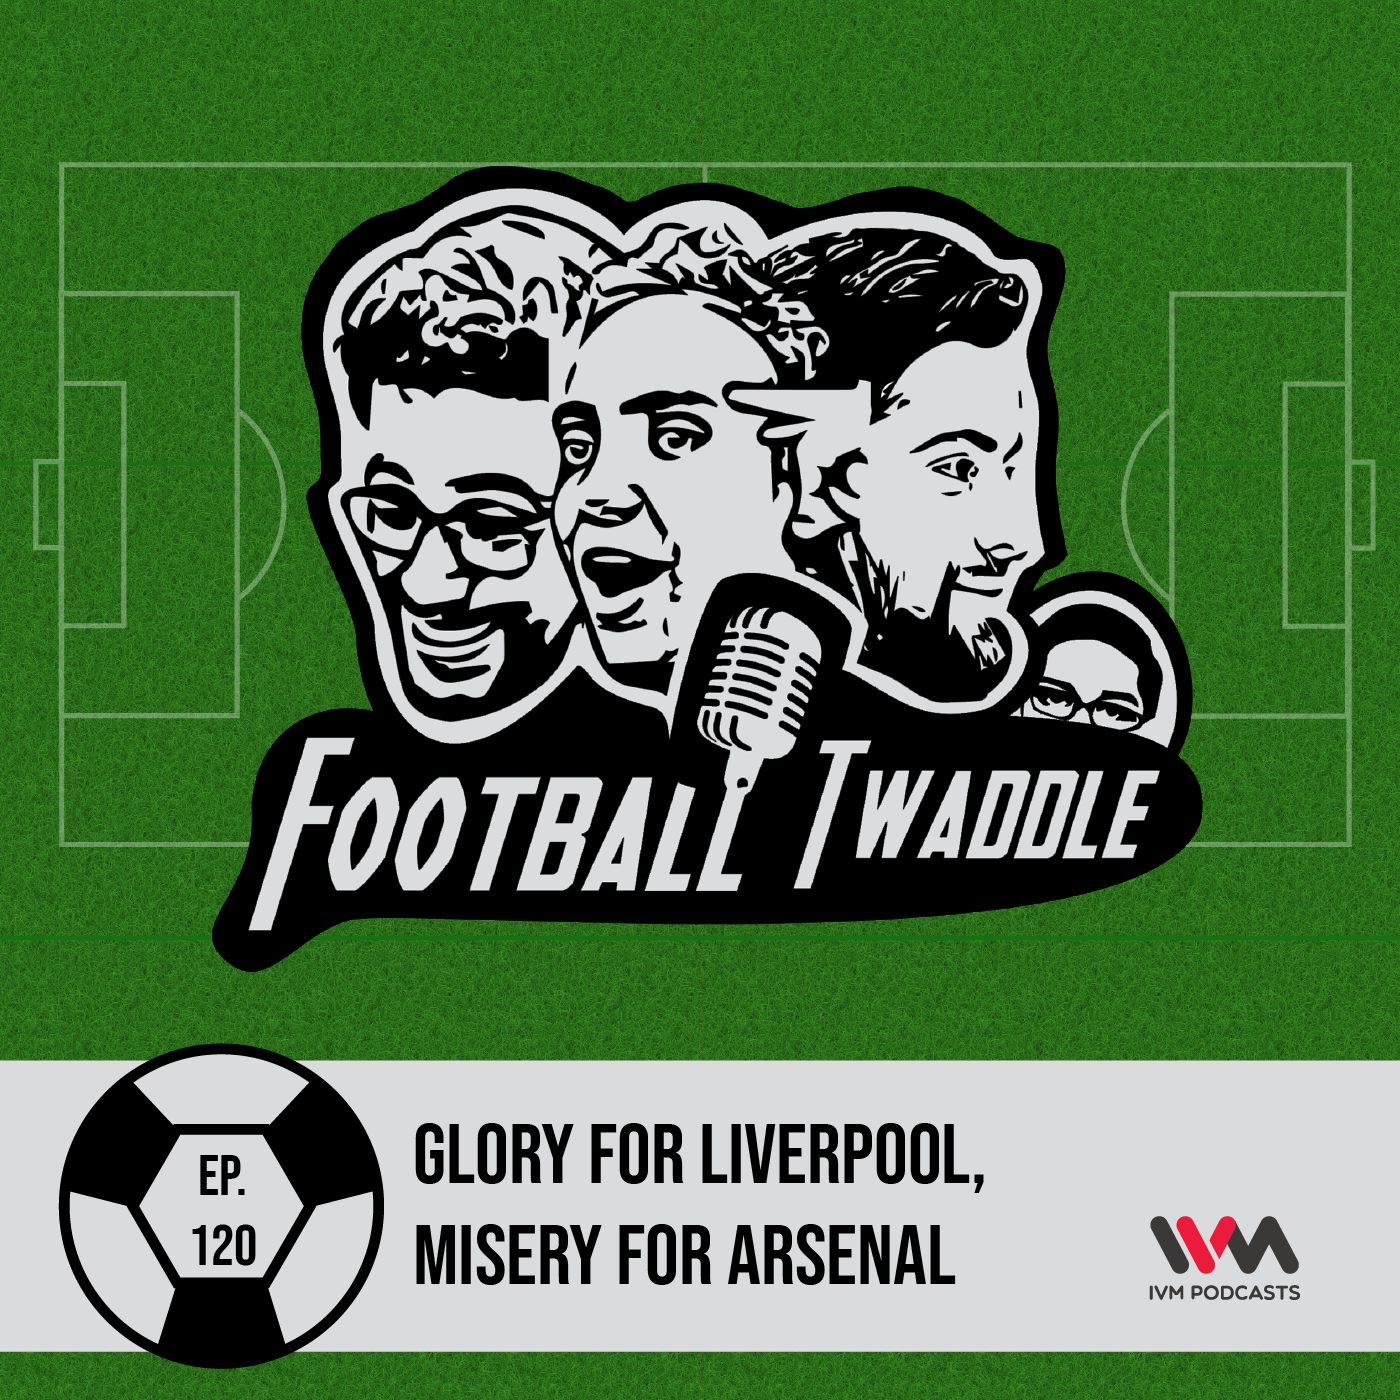 Glory for Liverpool, Misery for Arsenal